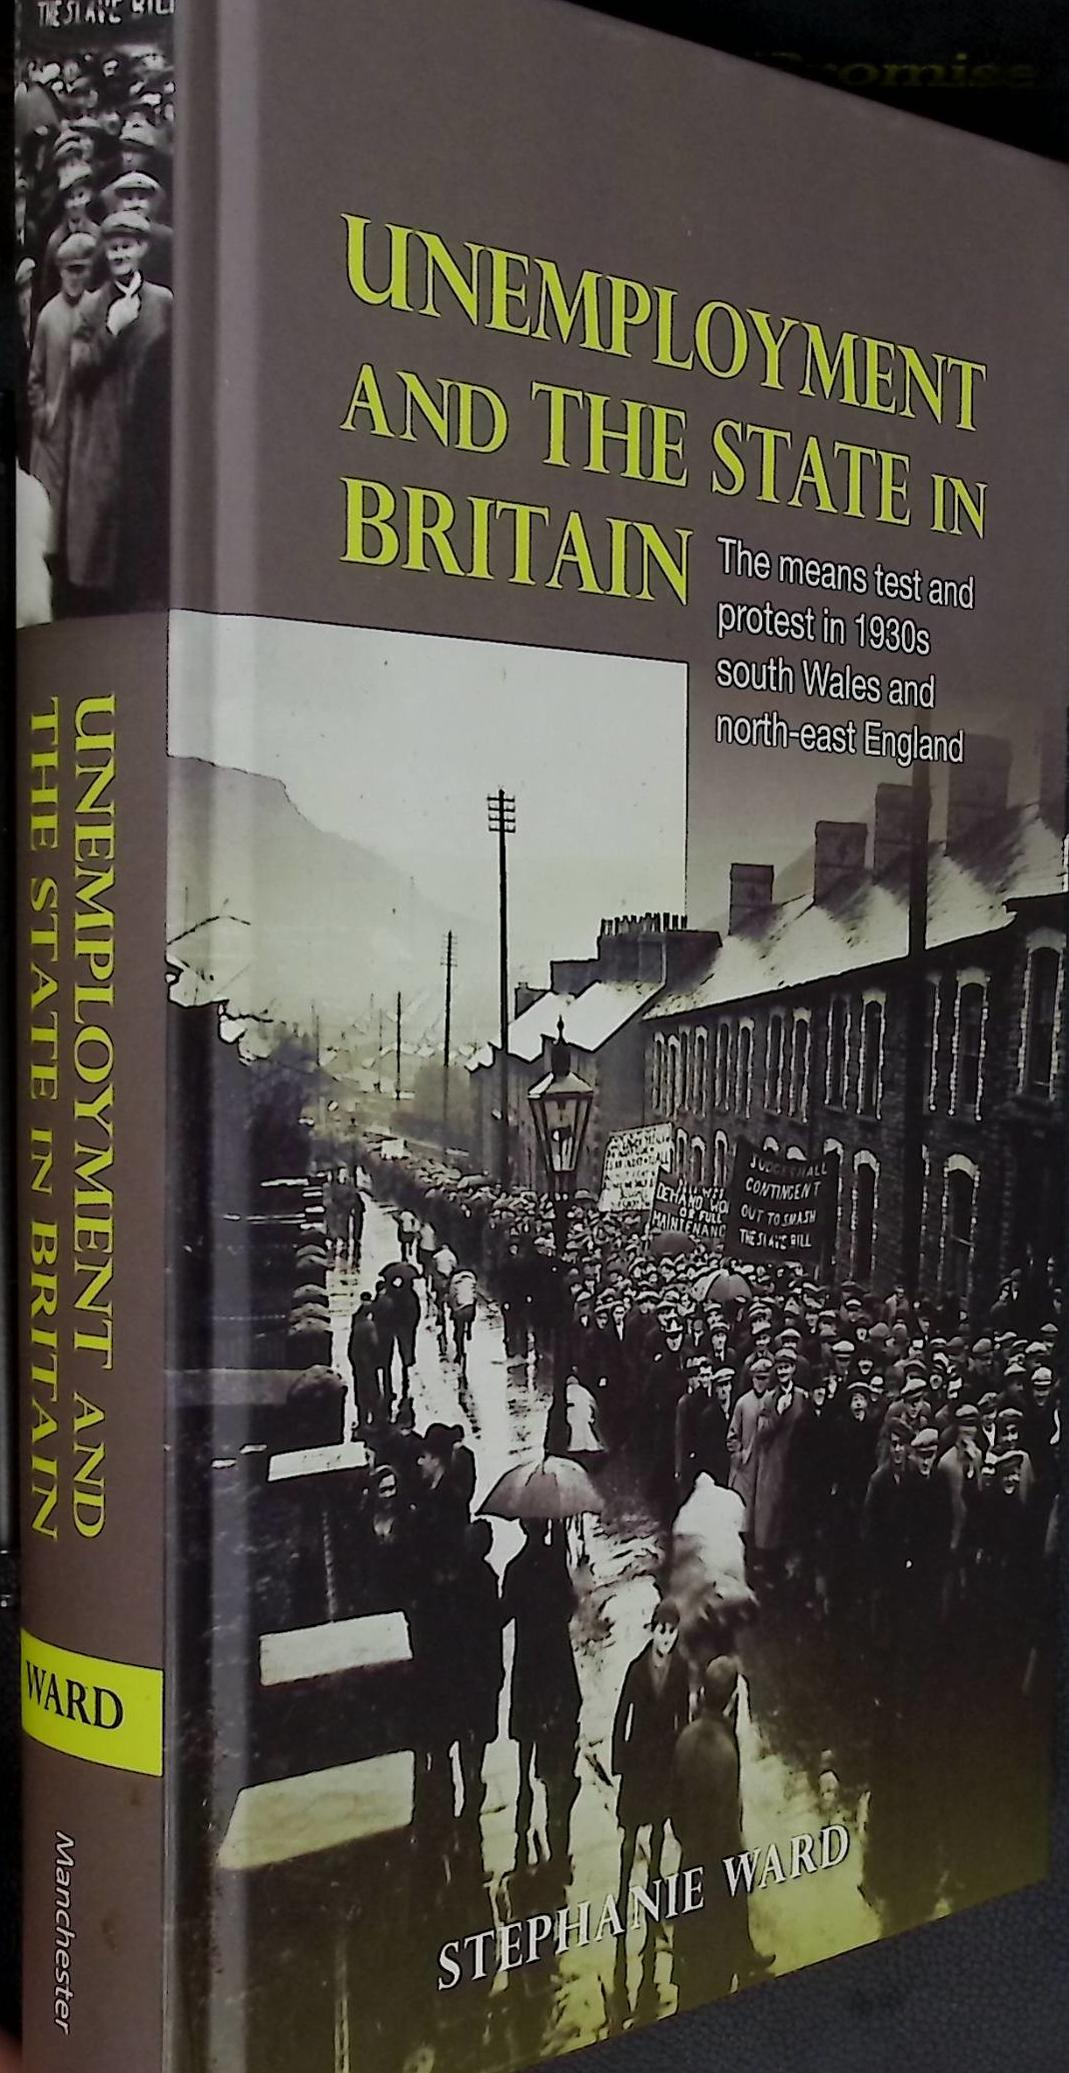 Unemployment and the State in Britain. The Means Test and Protest in 1930s South Wales and North East England